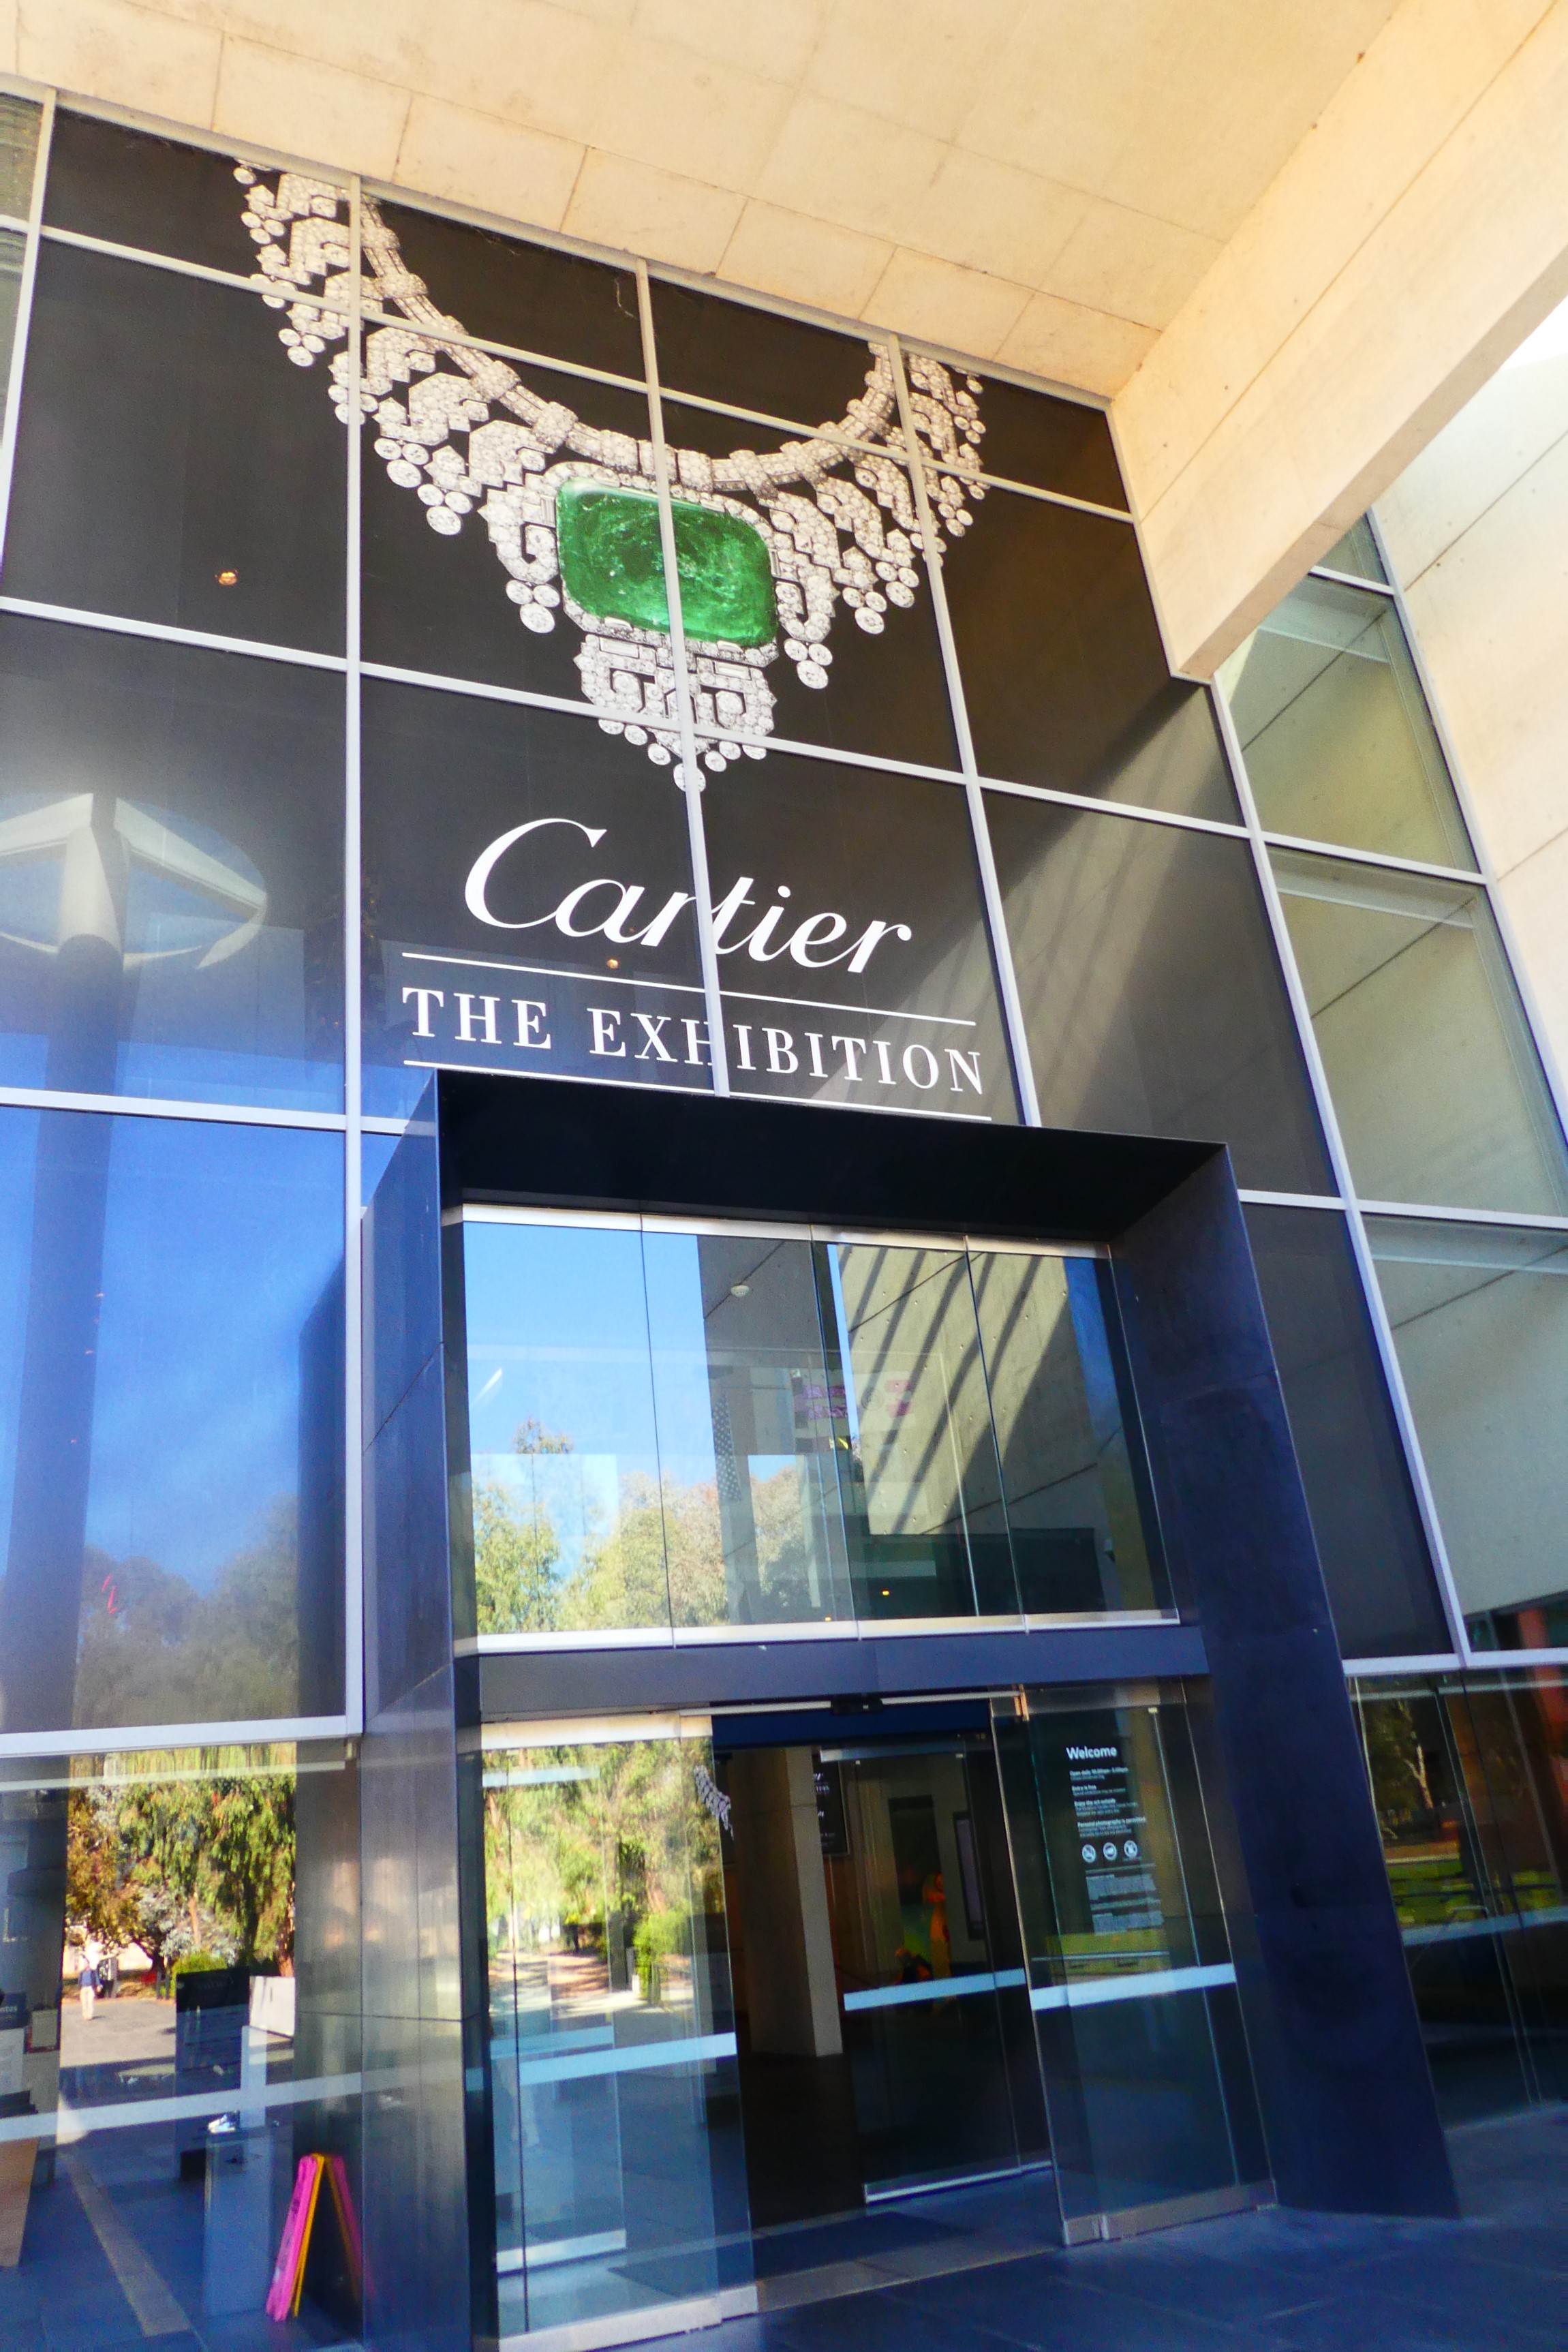 cartier exhibition canberra ticket cost